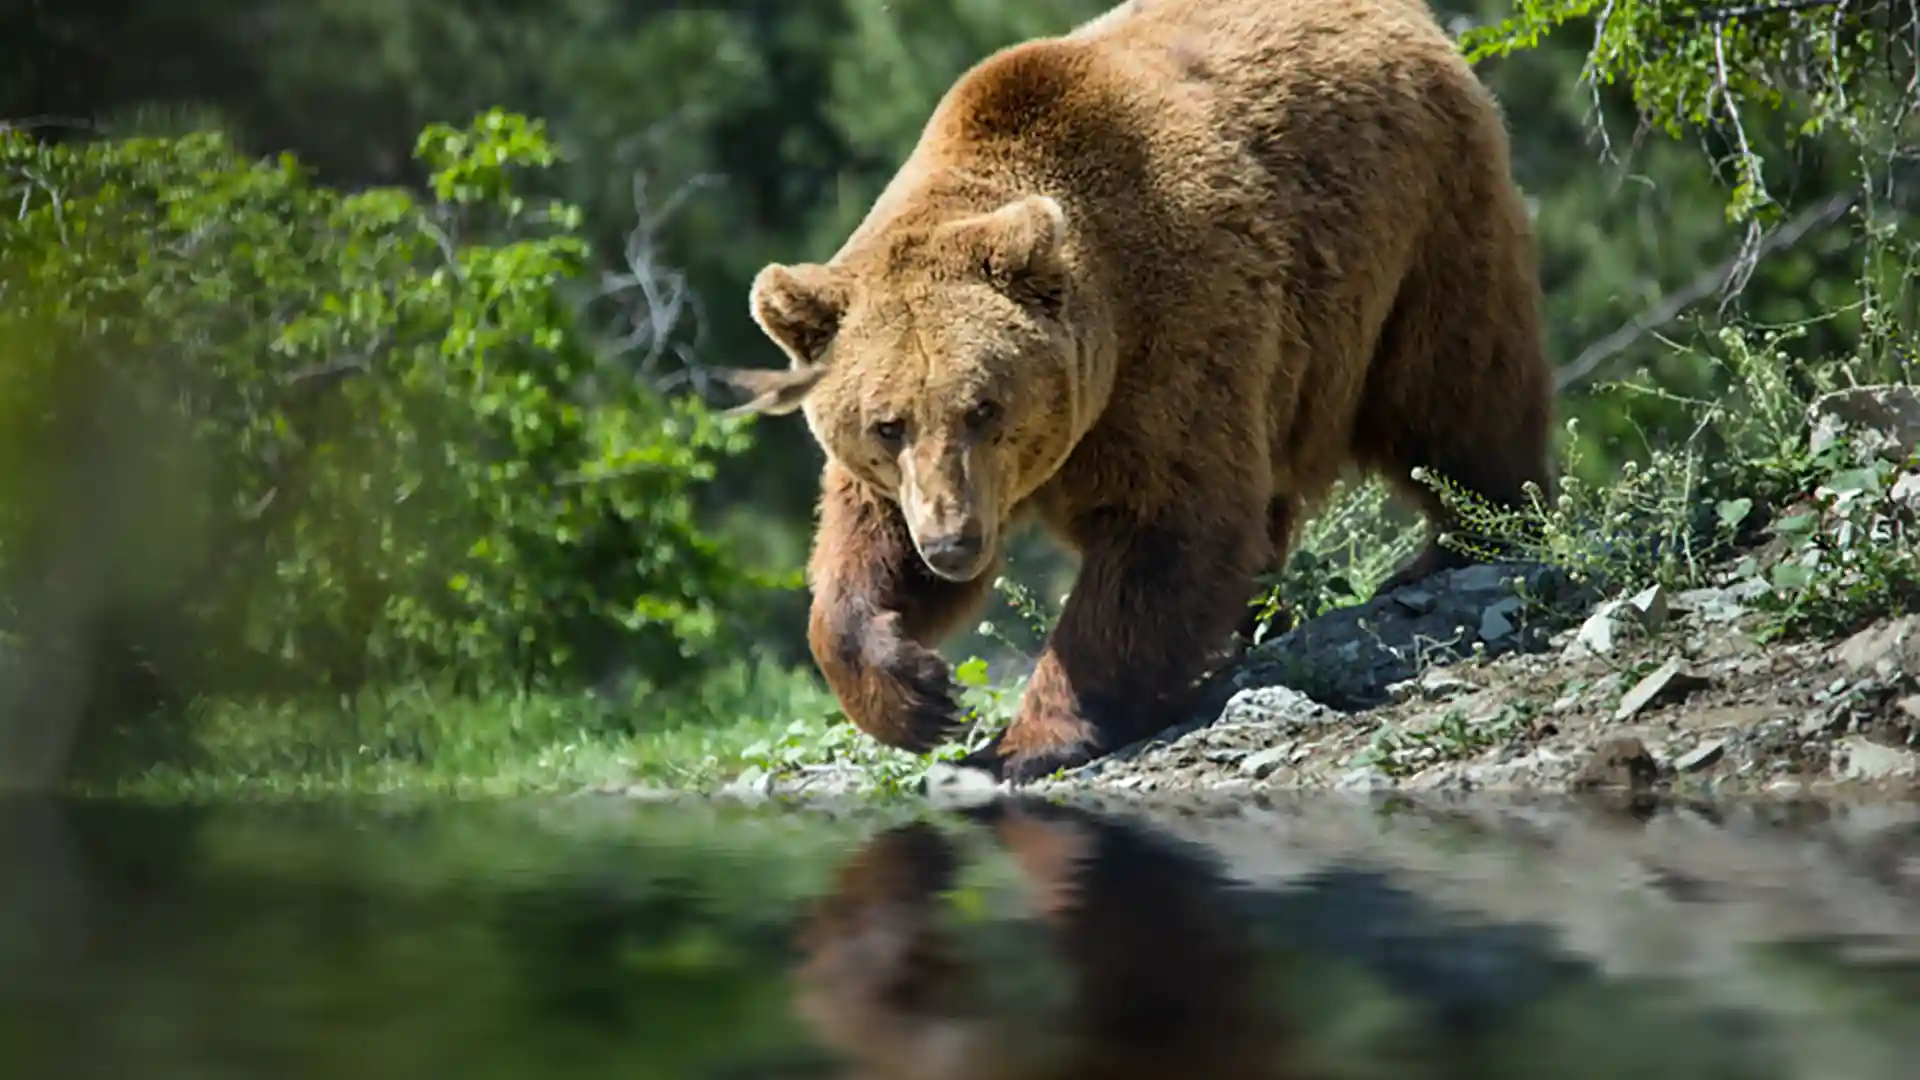 Brown bear approaching calm waters with forest in background.